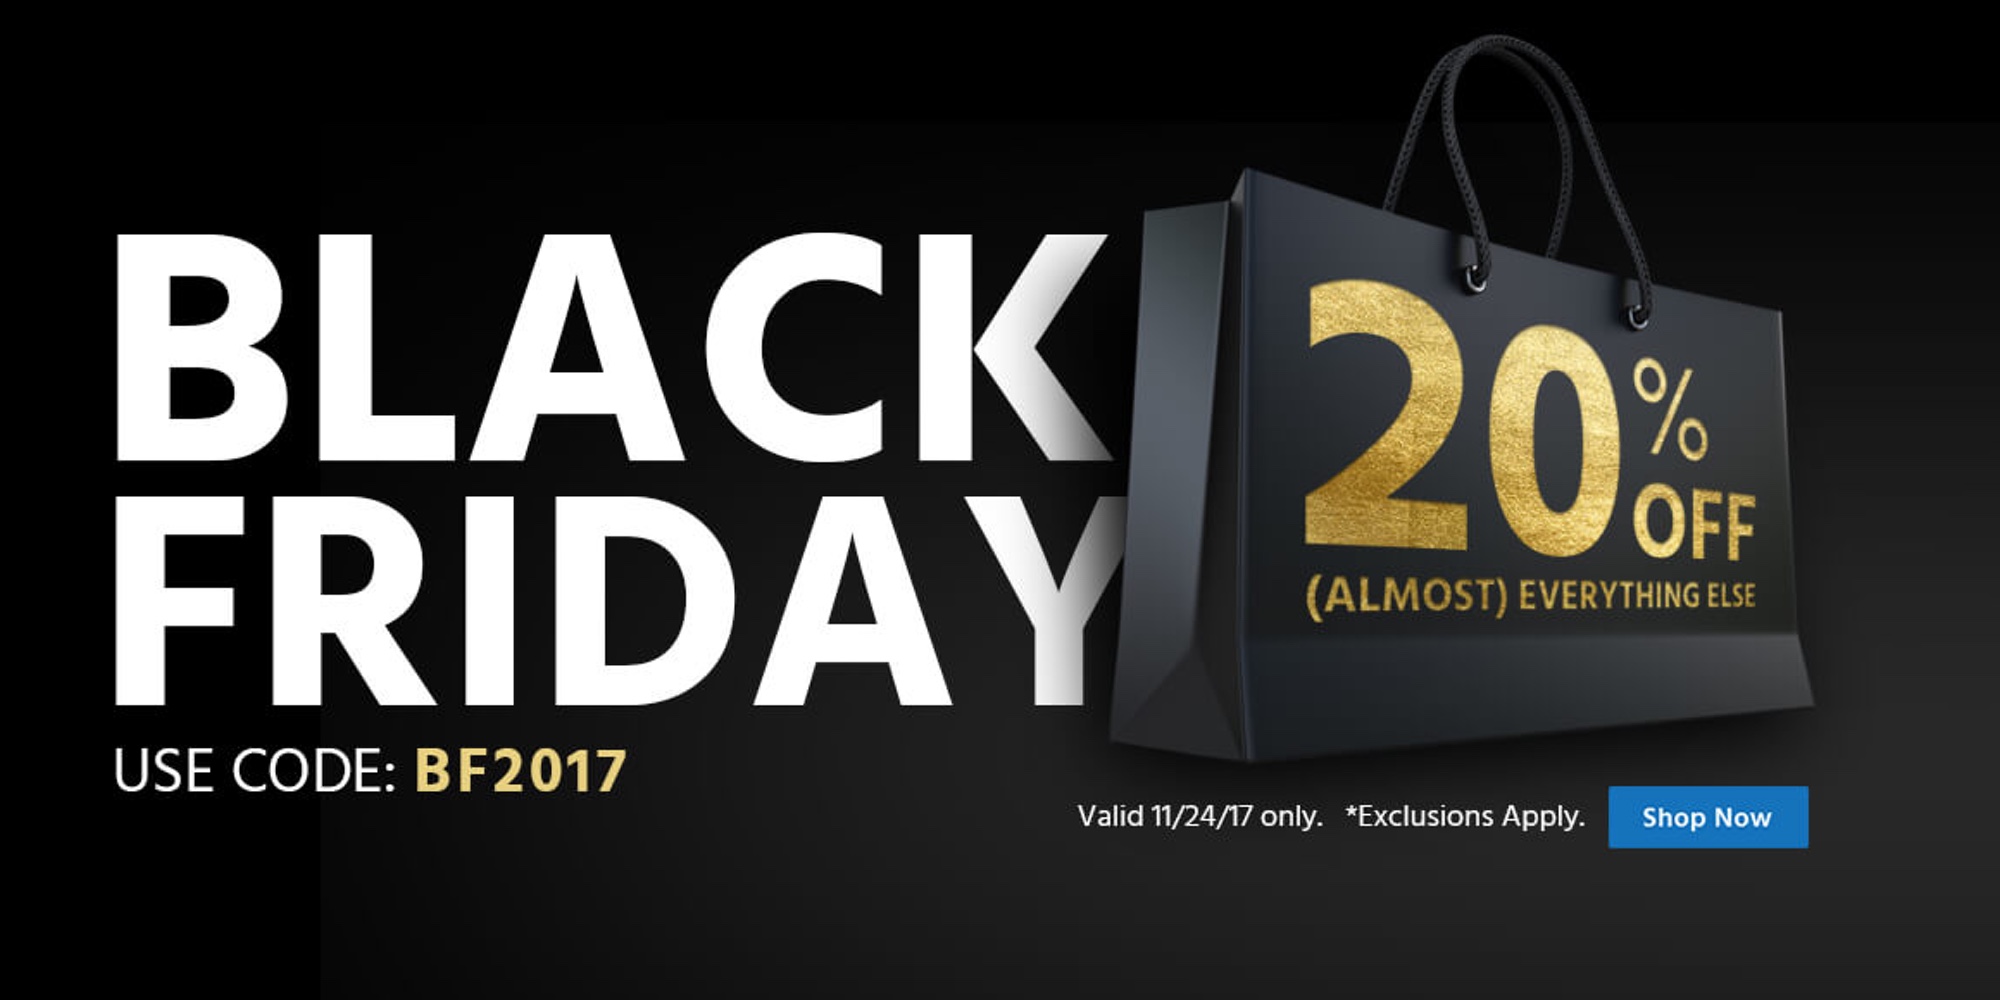 Monoprice Black Friday coupon code takes 20% off sitewide: cables - Will Ww2 Have A Deal On Black Friday